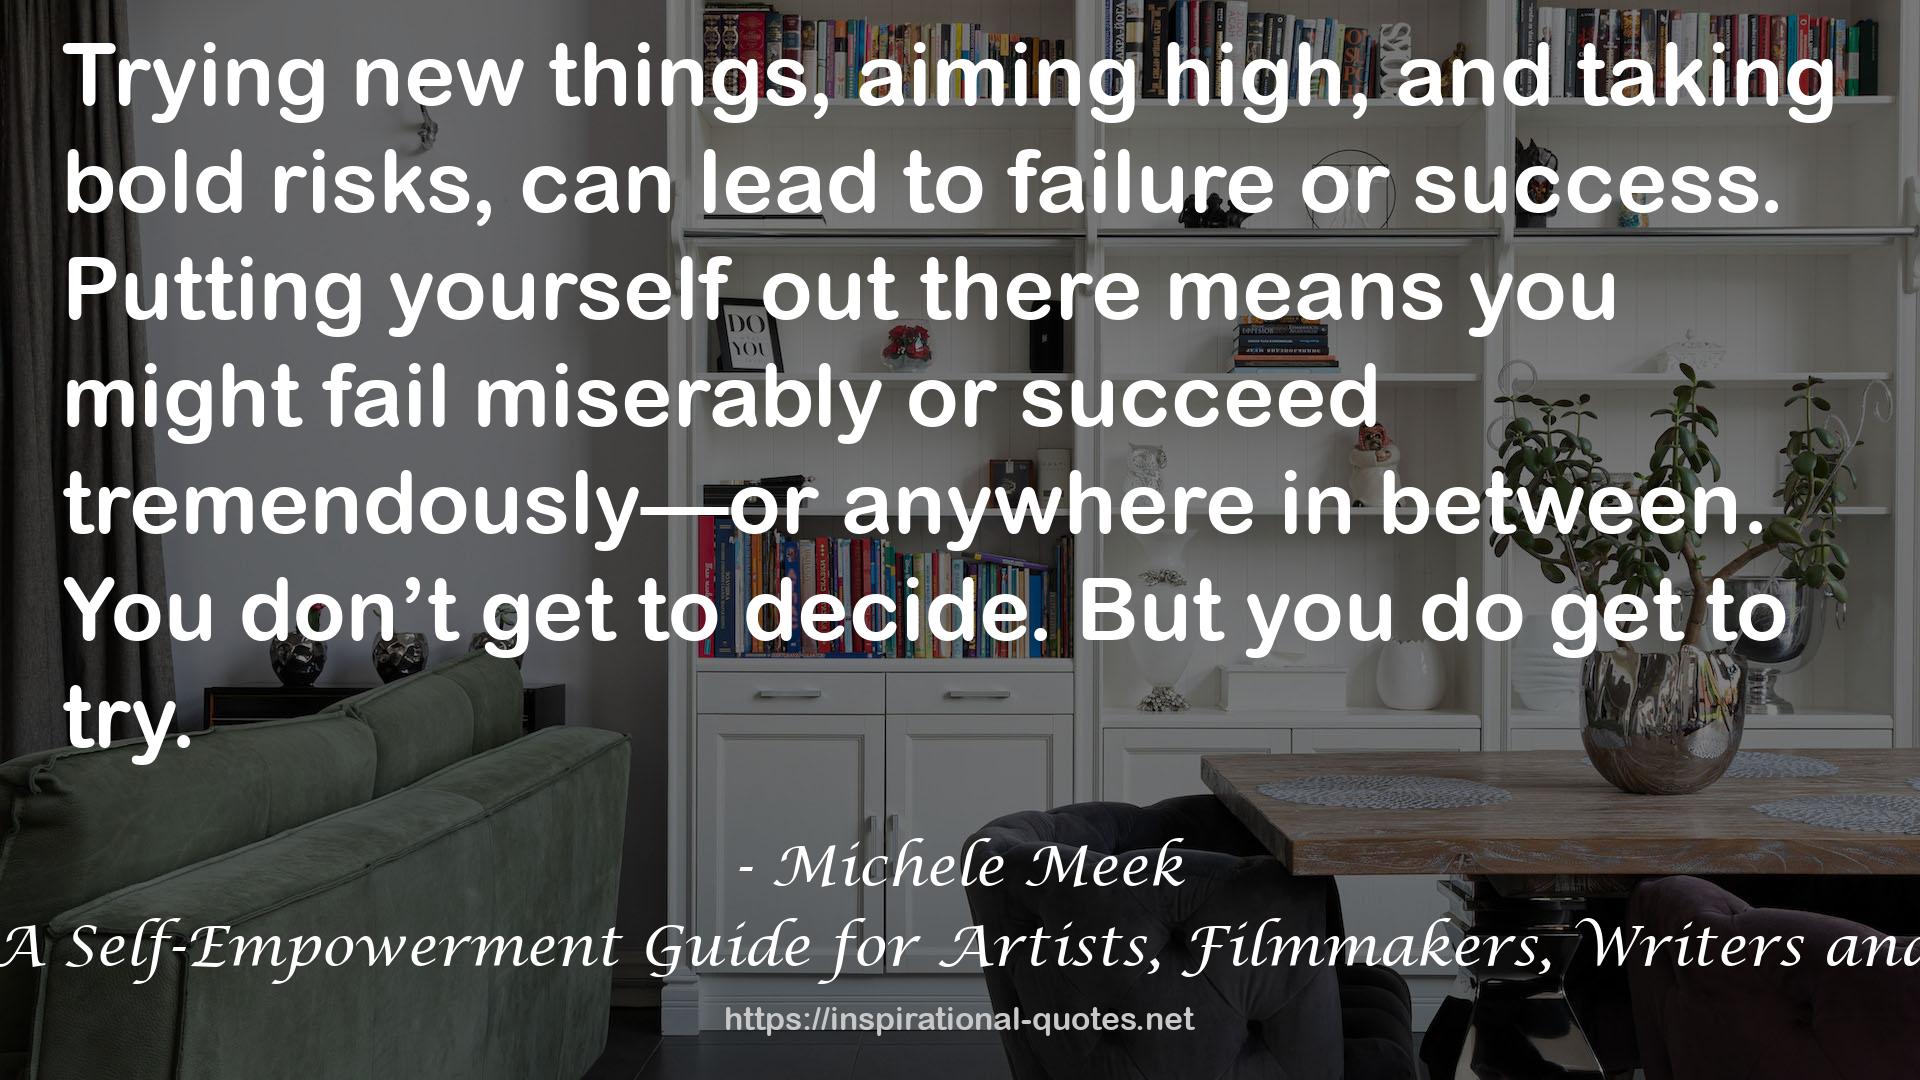 The Mastermind Failure Club: A Self-Empowerment Guide for Artists, Filmmakers, Writers and Other Creative Entrepreneurs QUOTES